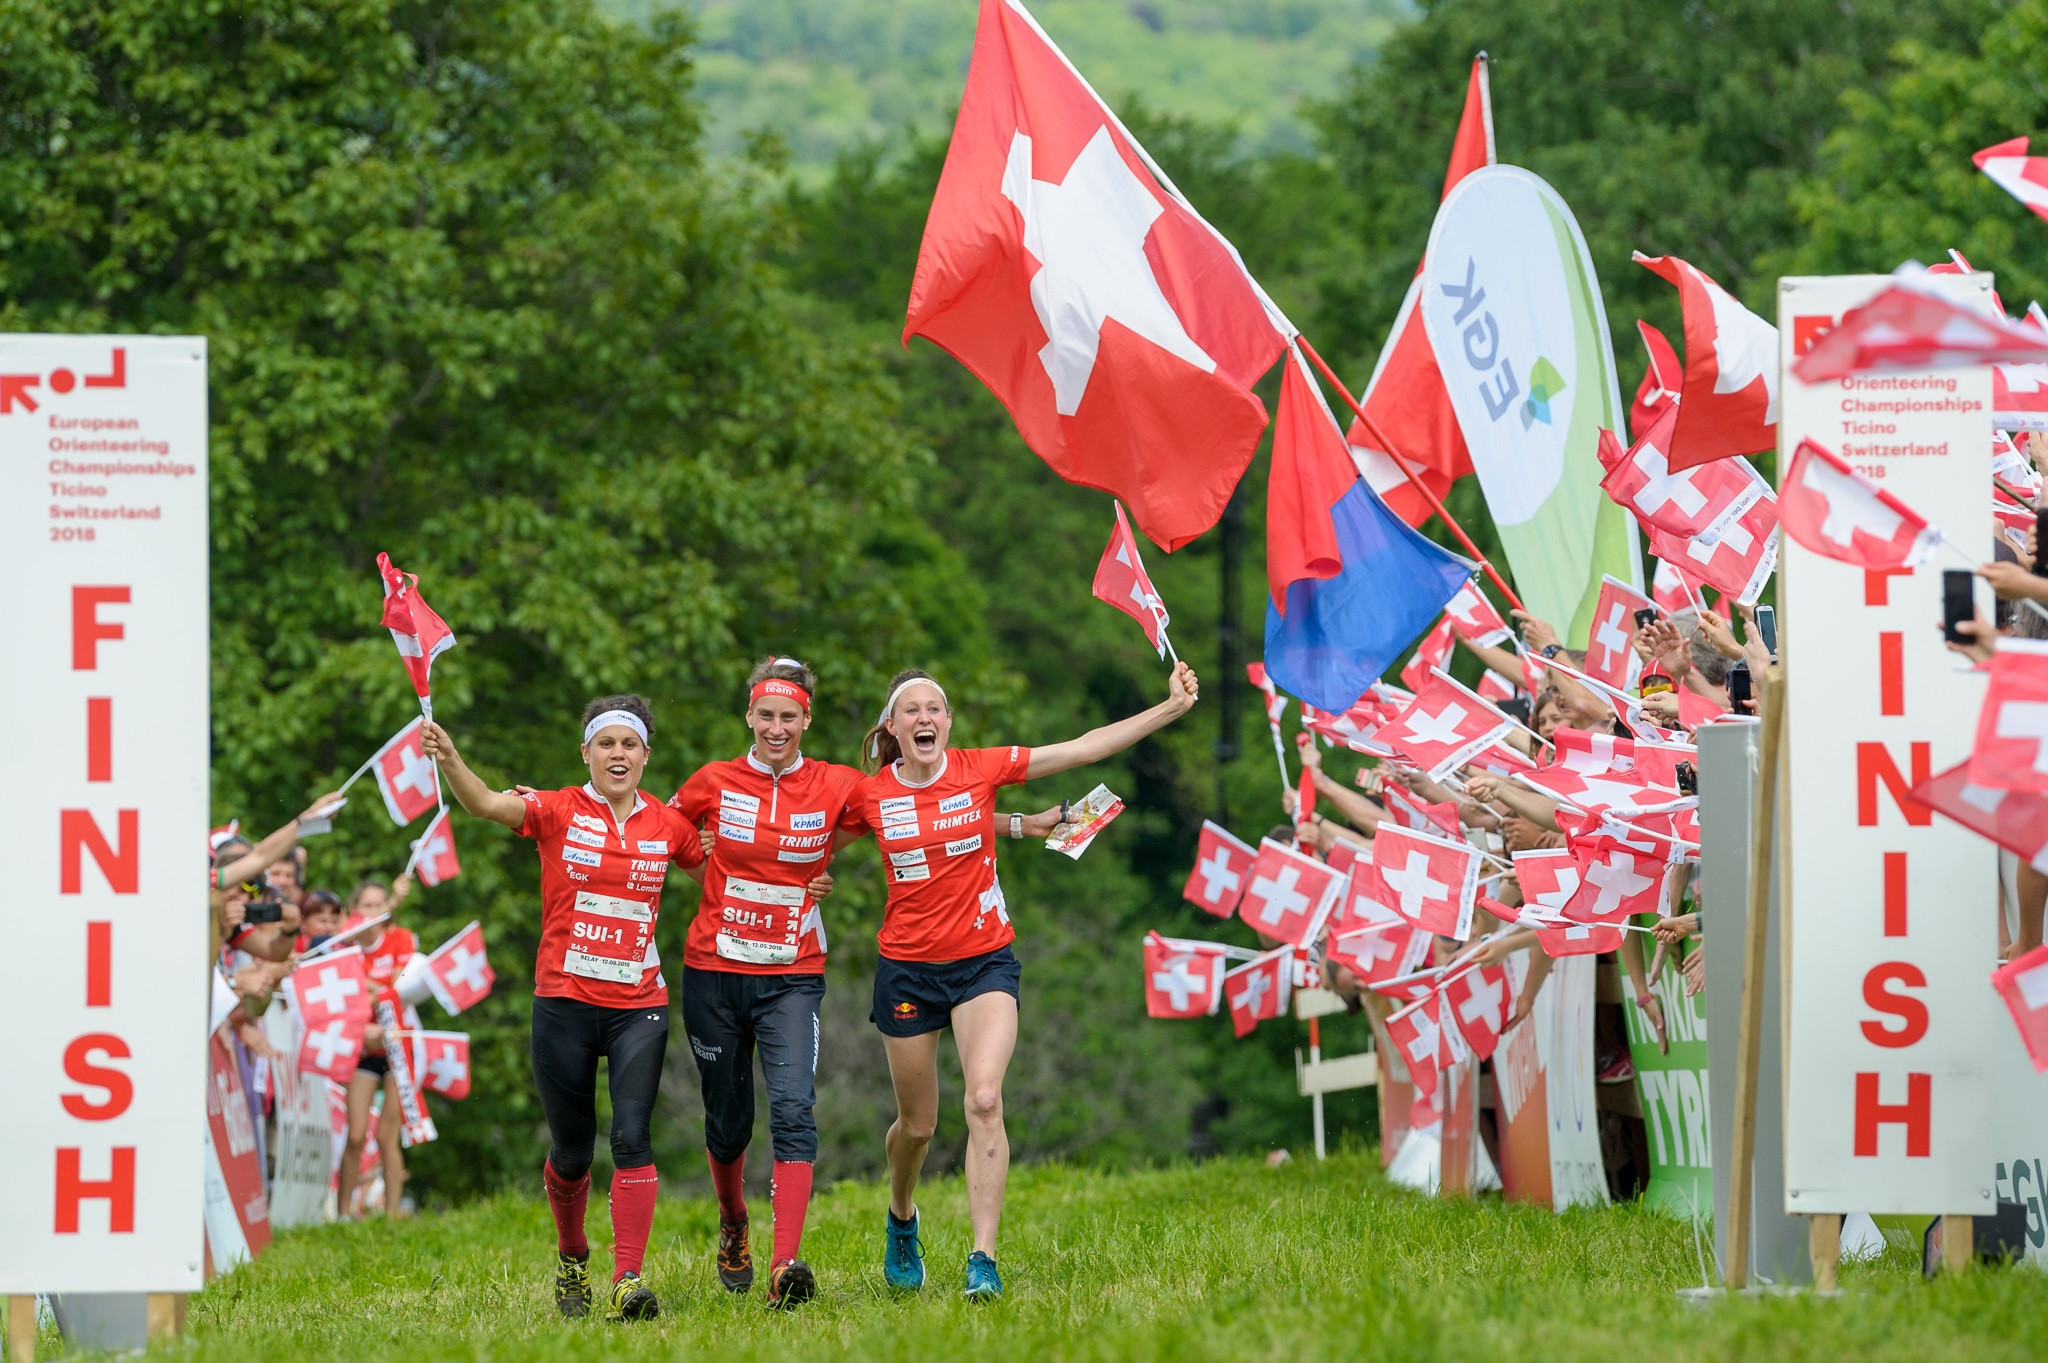 Switzerland and Norway clinch relay gold at European Orienteering Championships